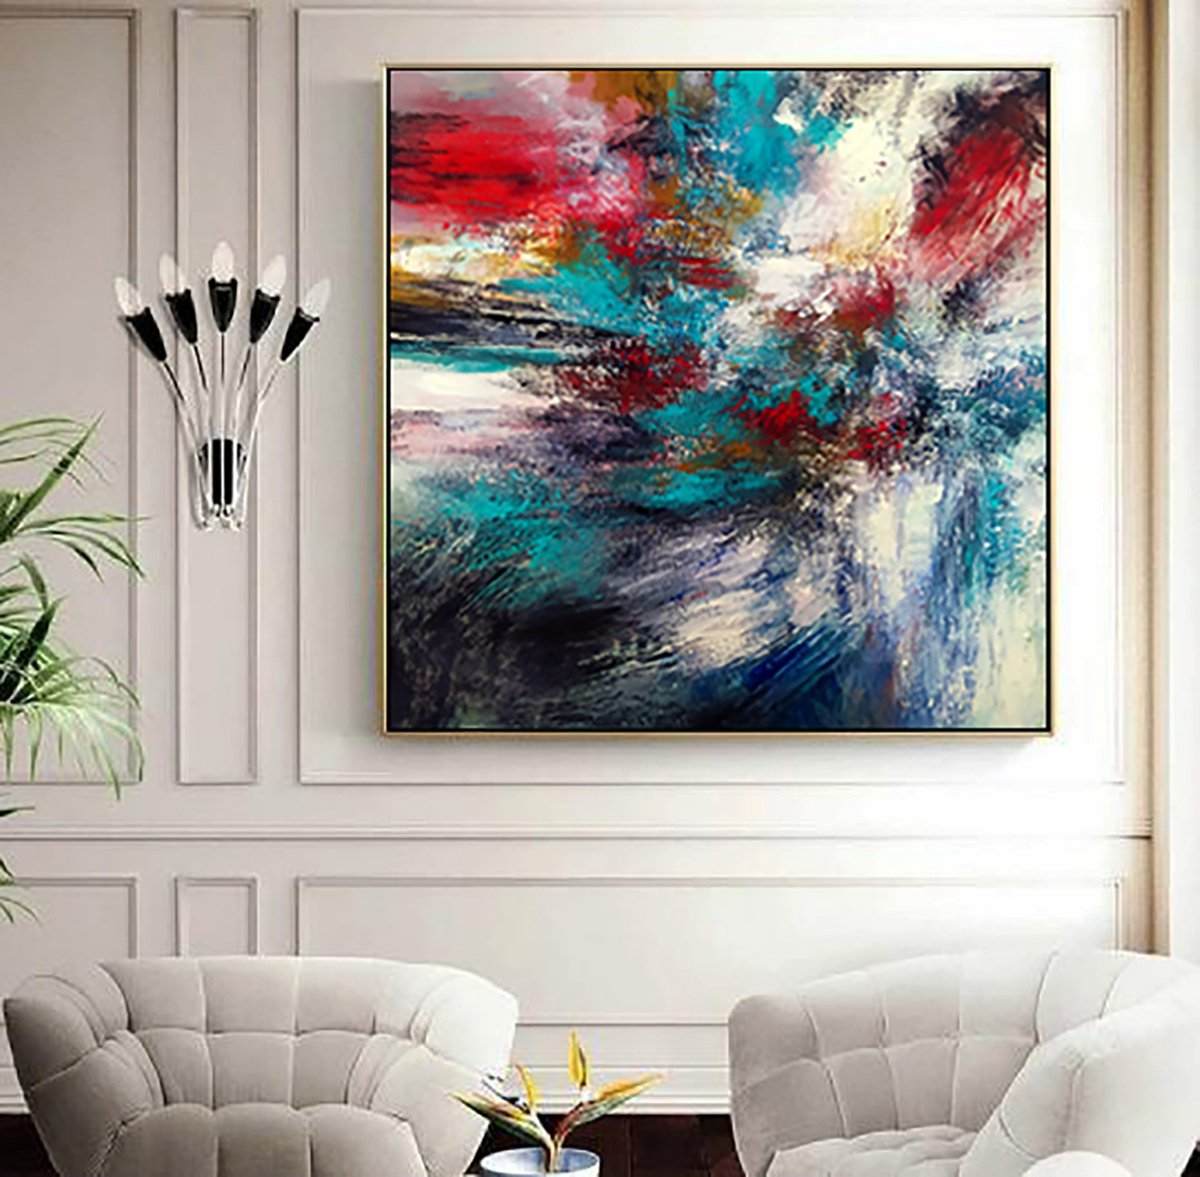 RAINBOW MEMORIES 100x100cm Abstract Textured Painting by Alexandra Petropoulou